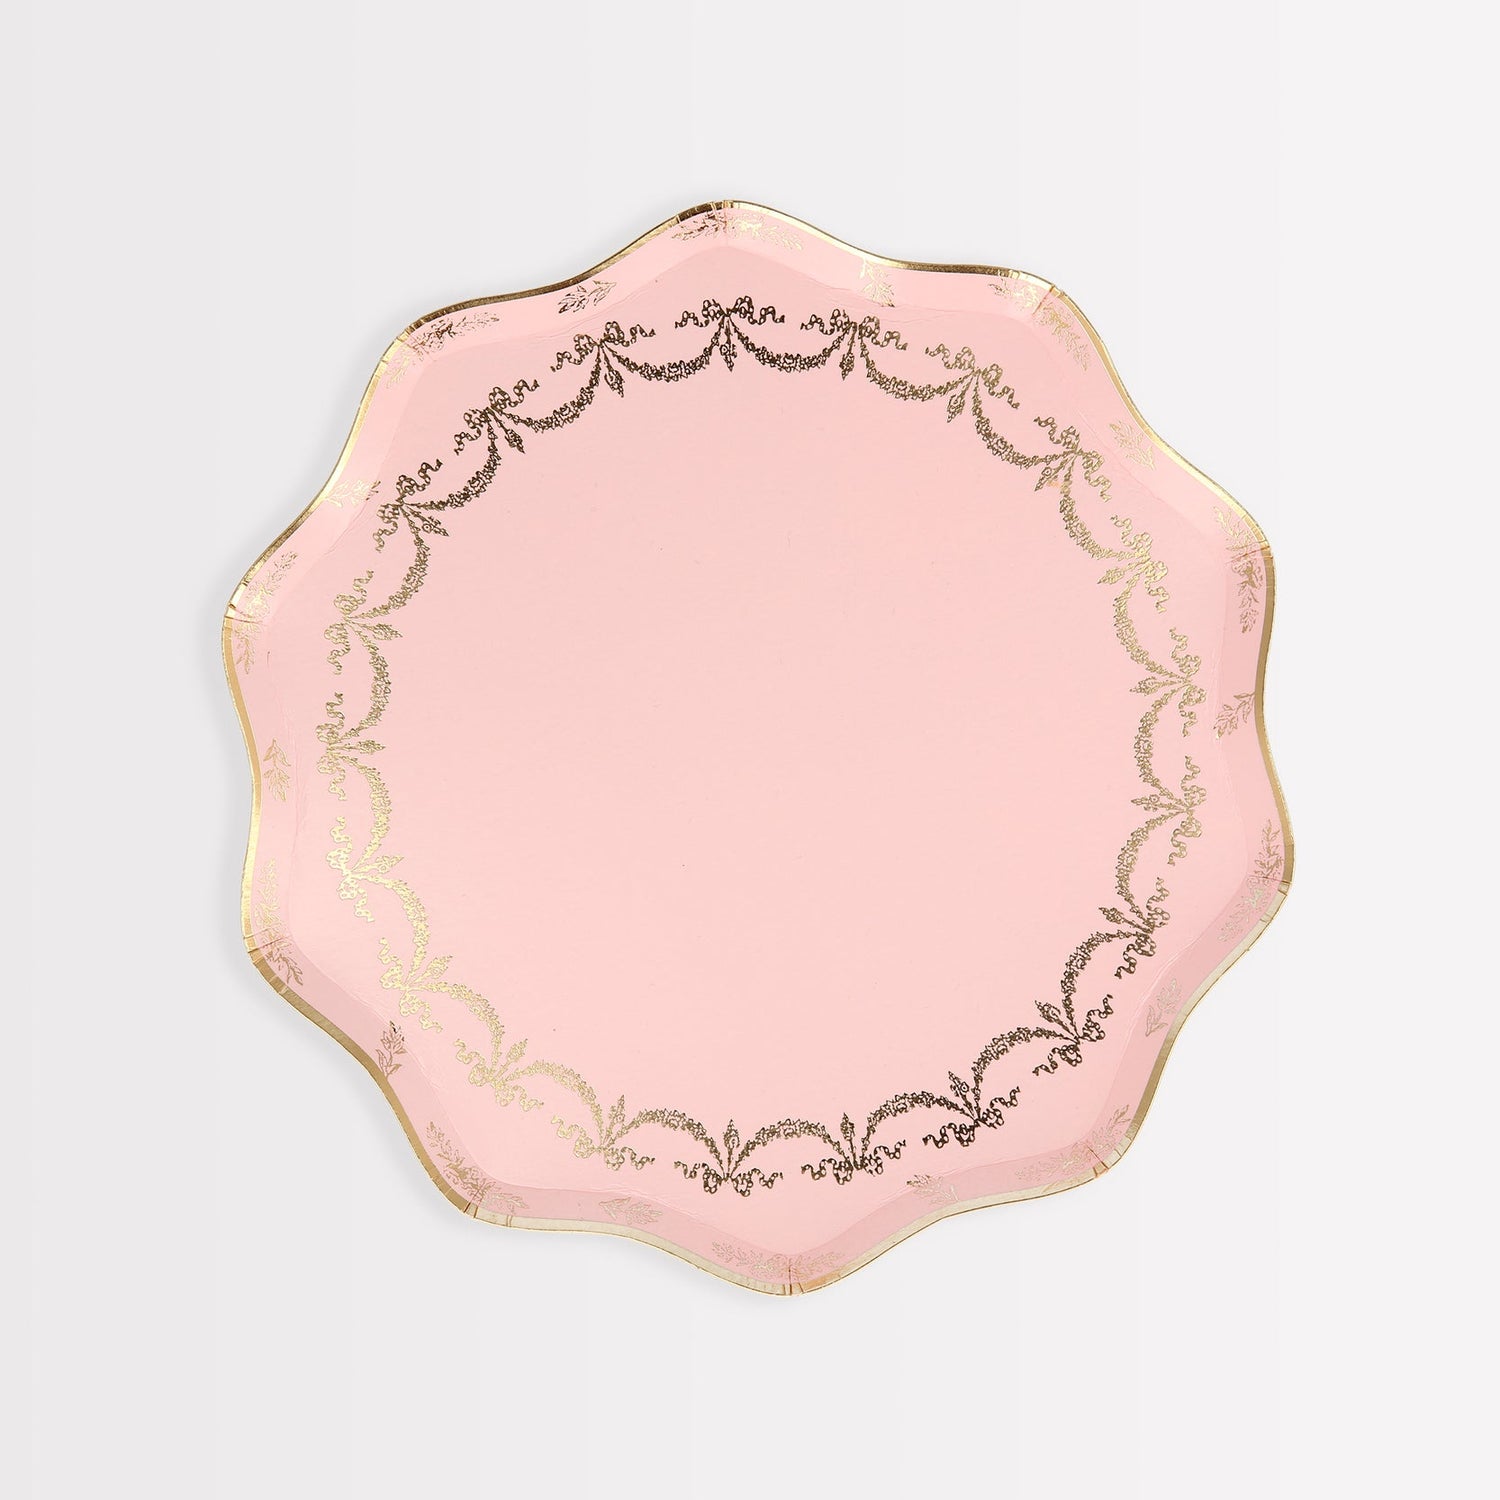 A pink Ladurée Paris paper plate with gold trim, perfect for serving delicate desserts like macarons.